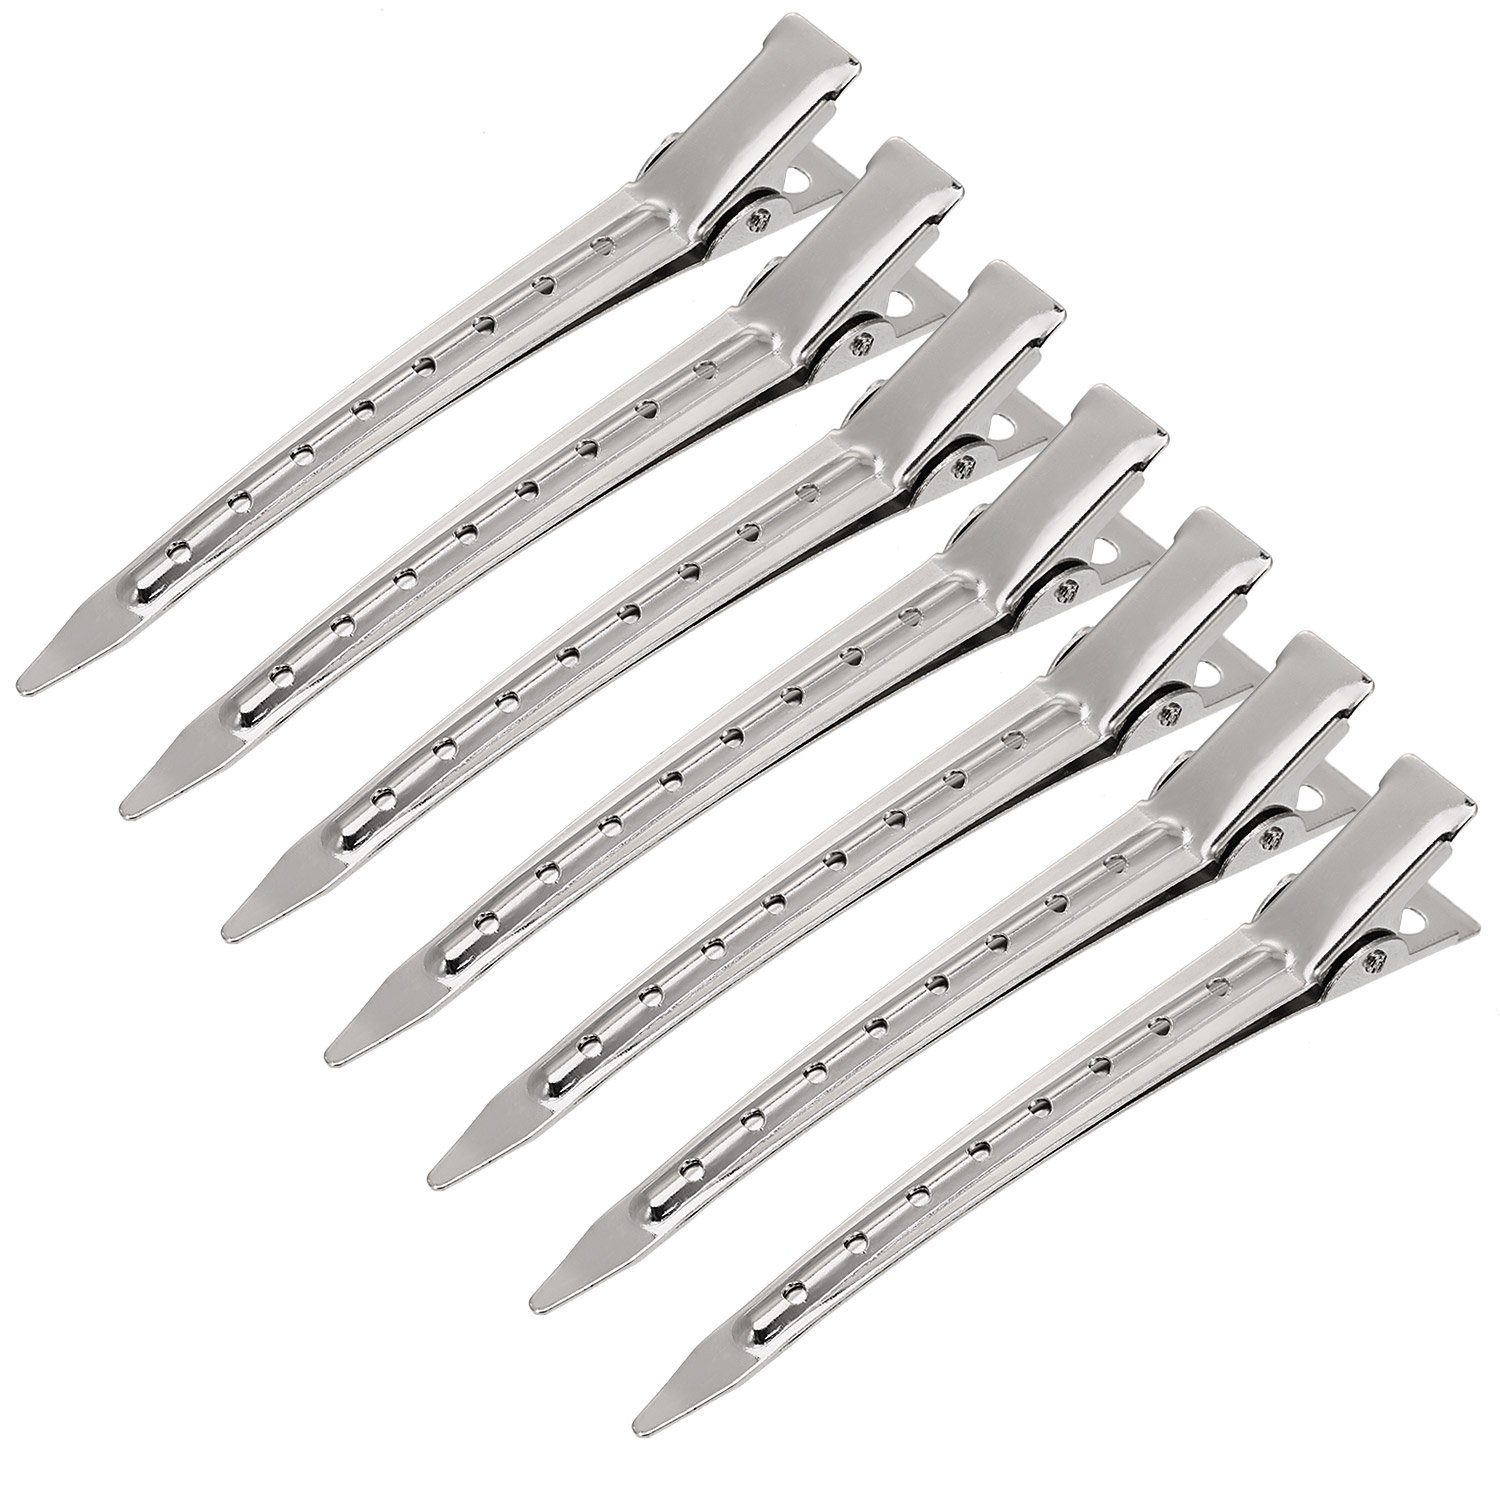 PHSZZ 65pcs Duck Billed Hair Clips for Styling Sectioning, Metal Silver Alligator Clips for Women, 3 Sizes for Roller, Pin Curl LOC Clips for Retwist, Salon